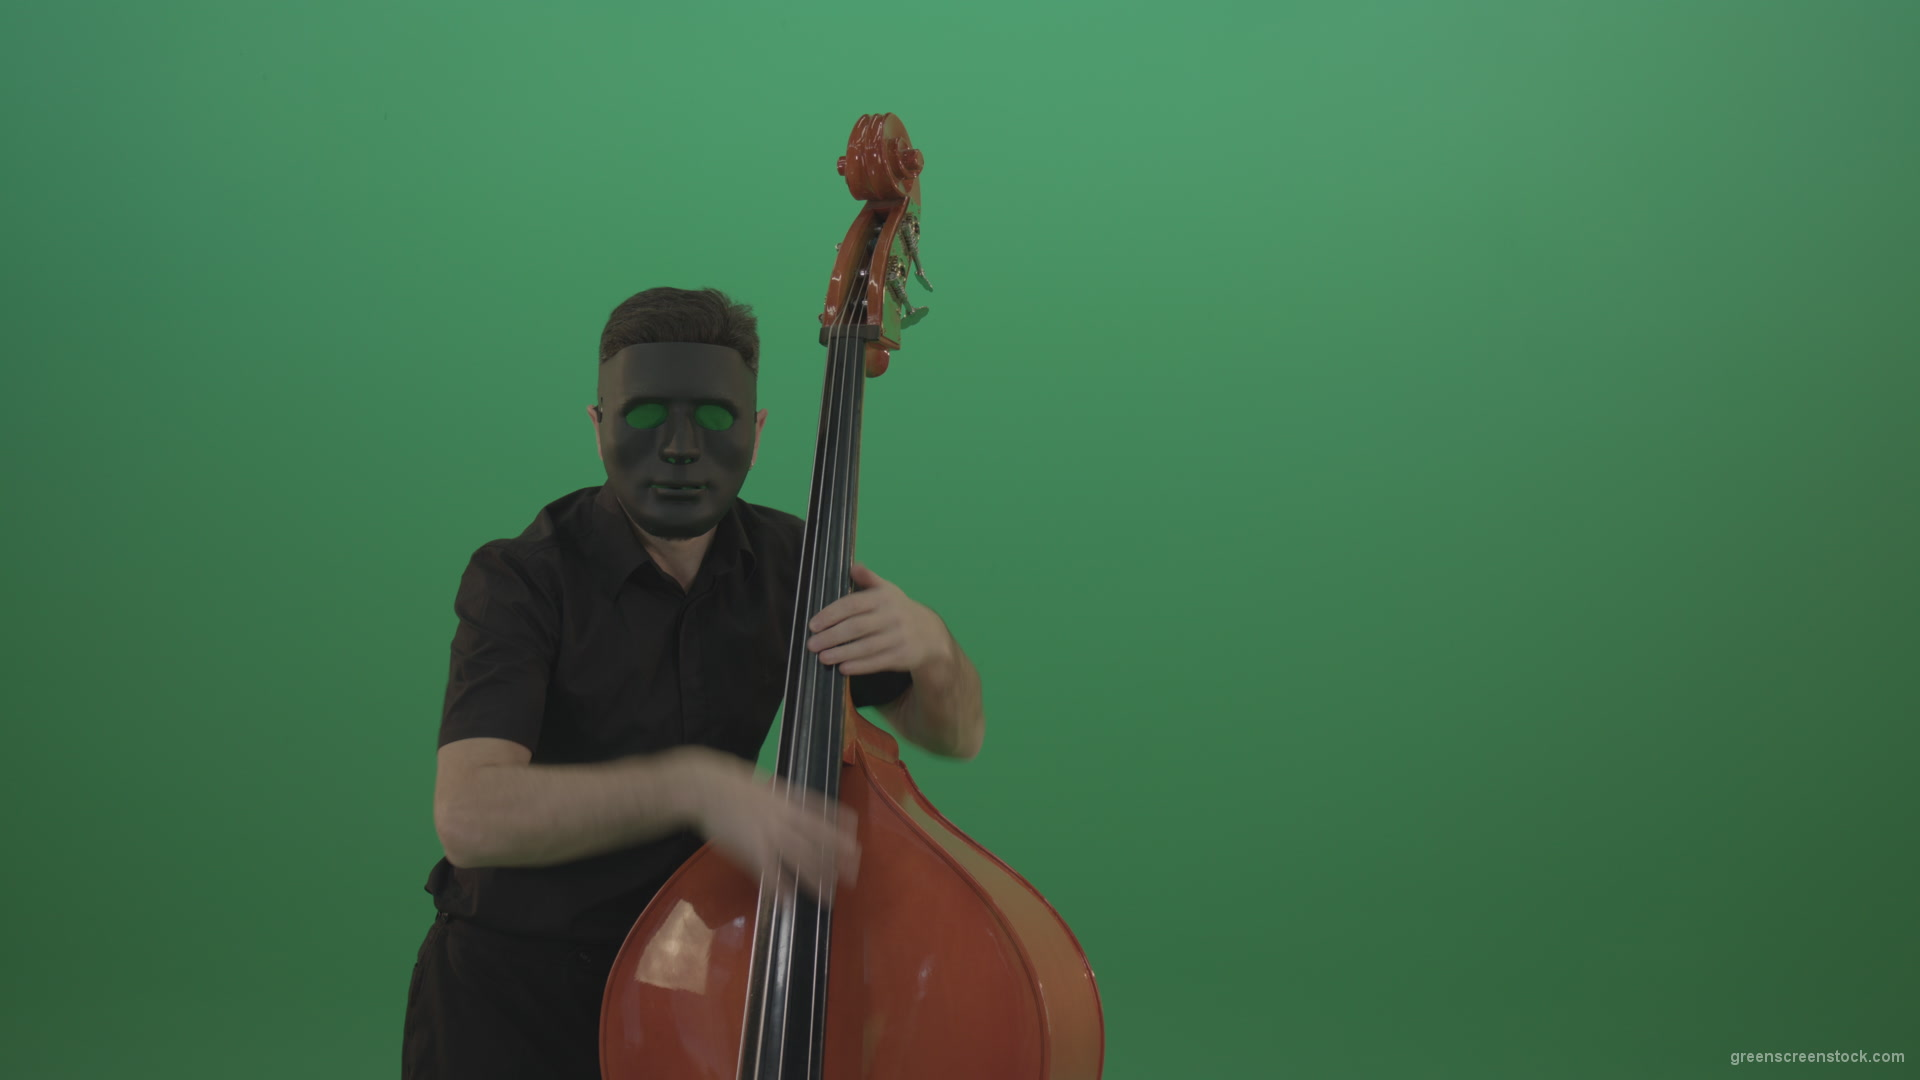 Man-in-black-mask-with-green-eyes-play-music-on-double-bass-instrument-isolated-on-green-screen_009 Green Screen Stock